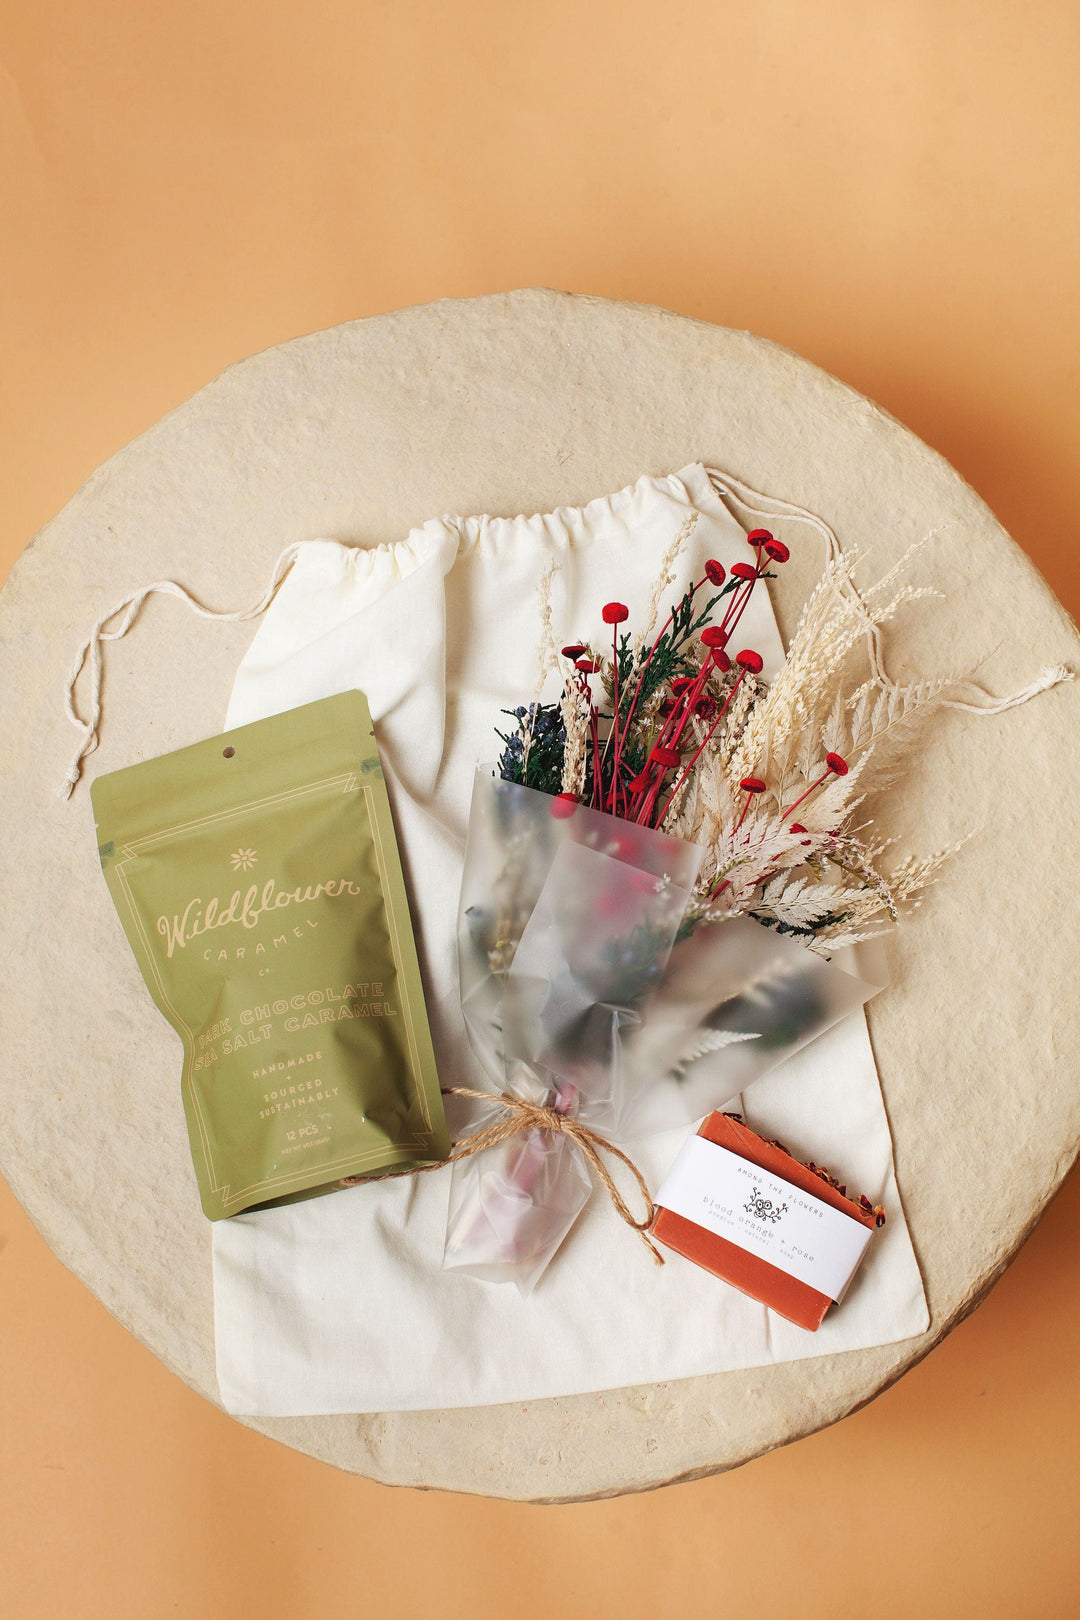 Idlewild Floral Co. Gift Giving Winter Gift Bag